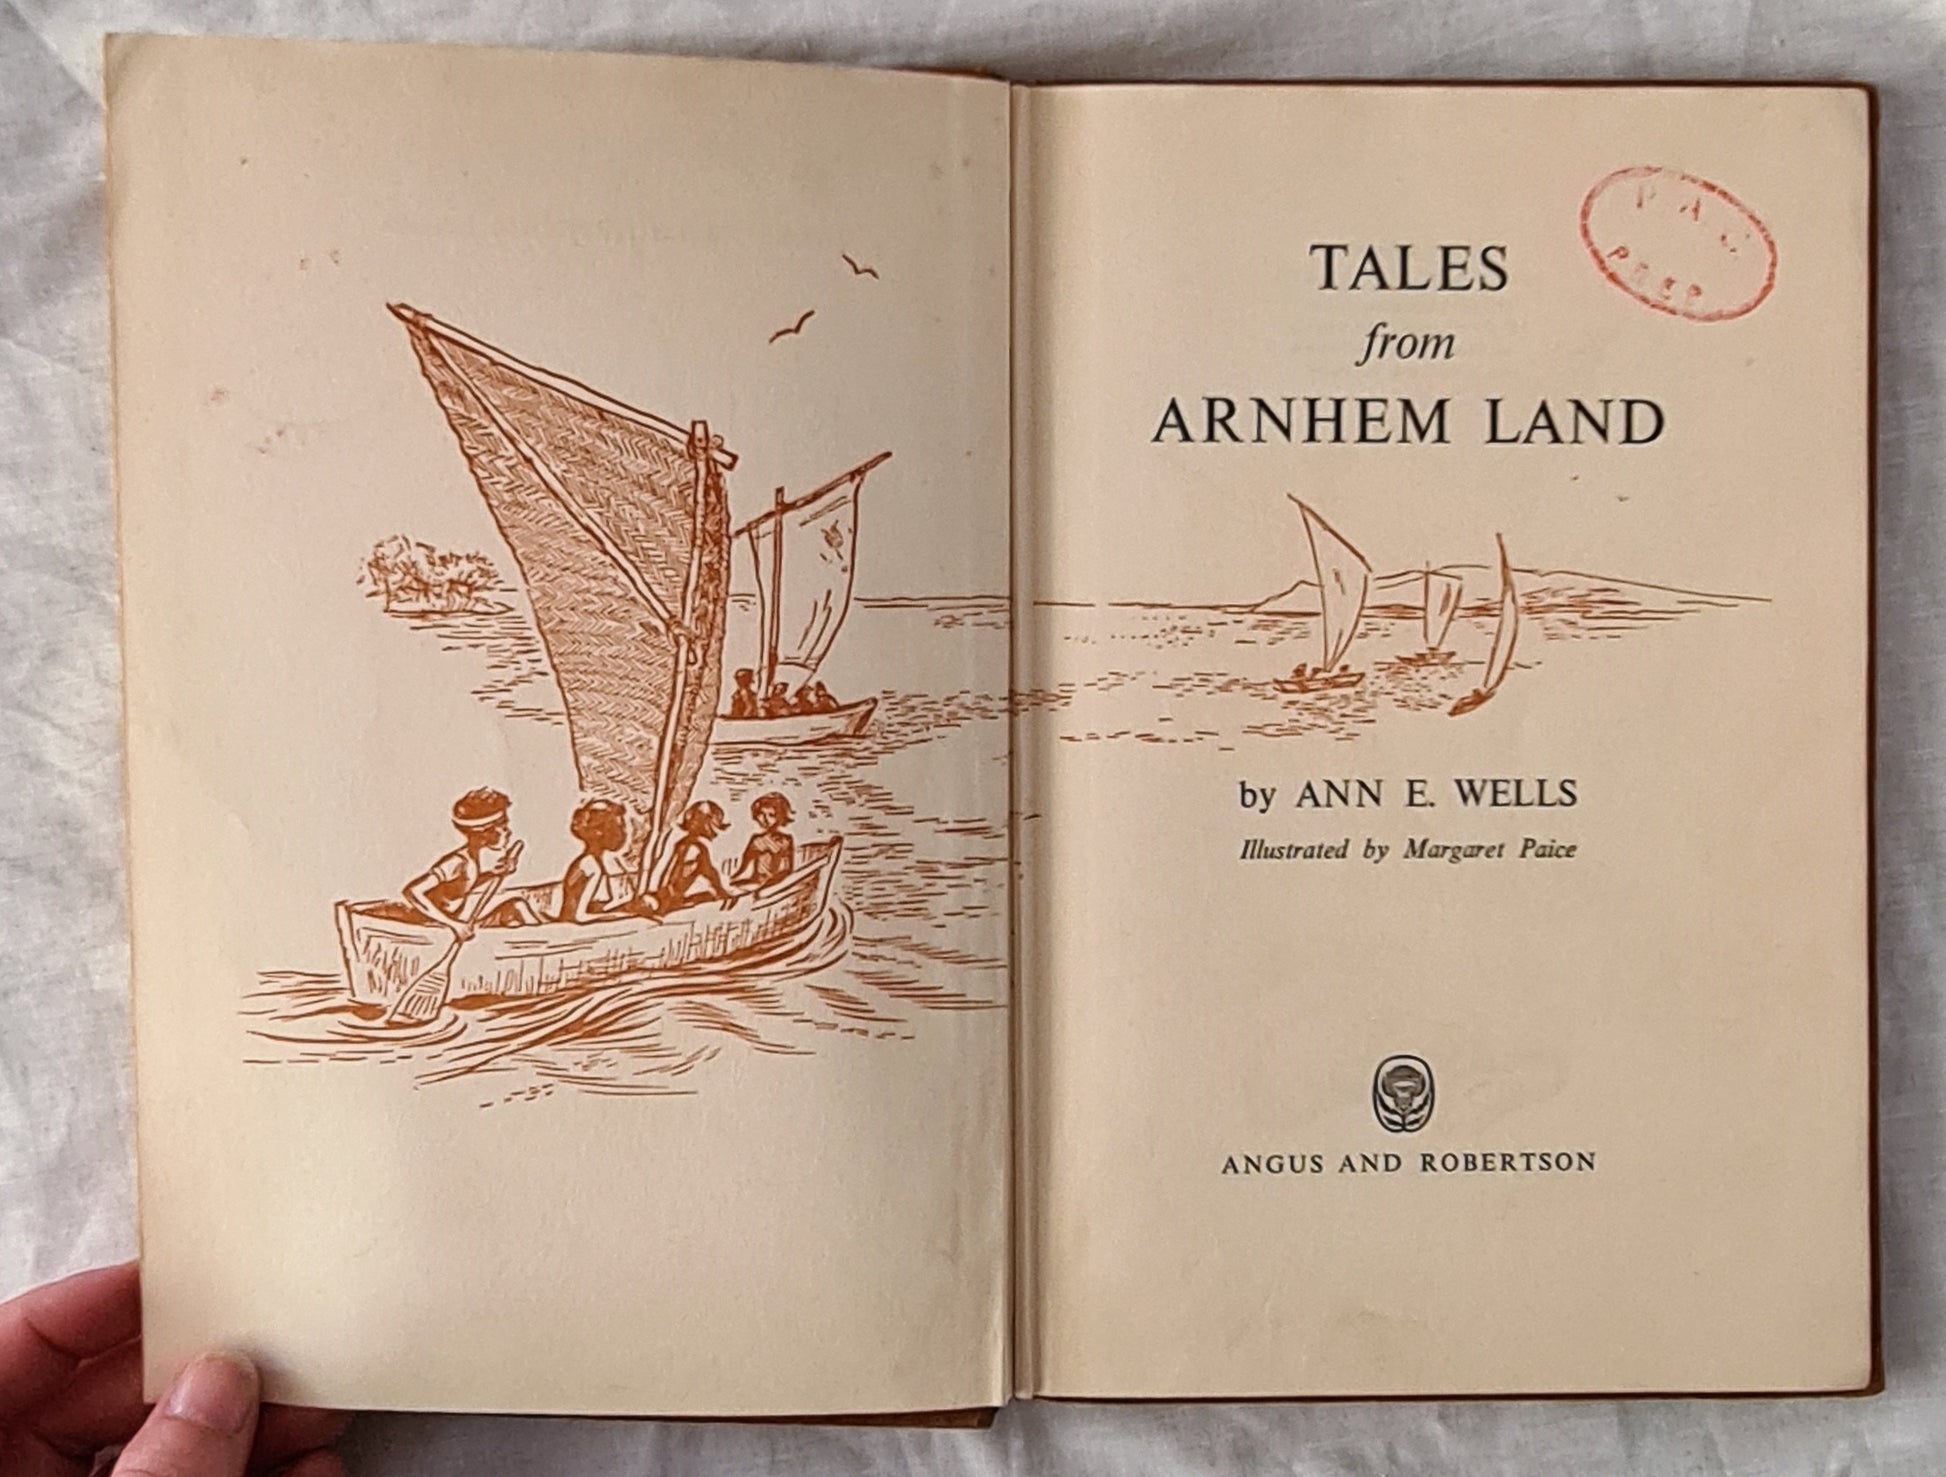 Tales from Arnhem Land  by Ann E. Wells  Illustrated by Margaret Paice